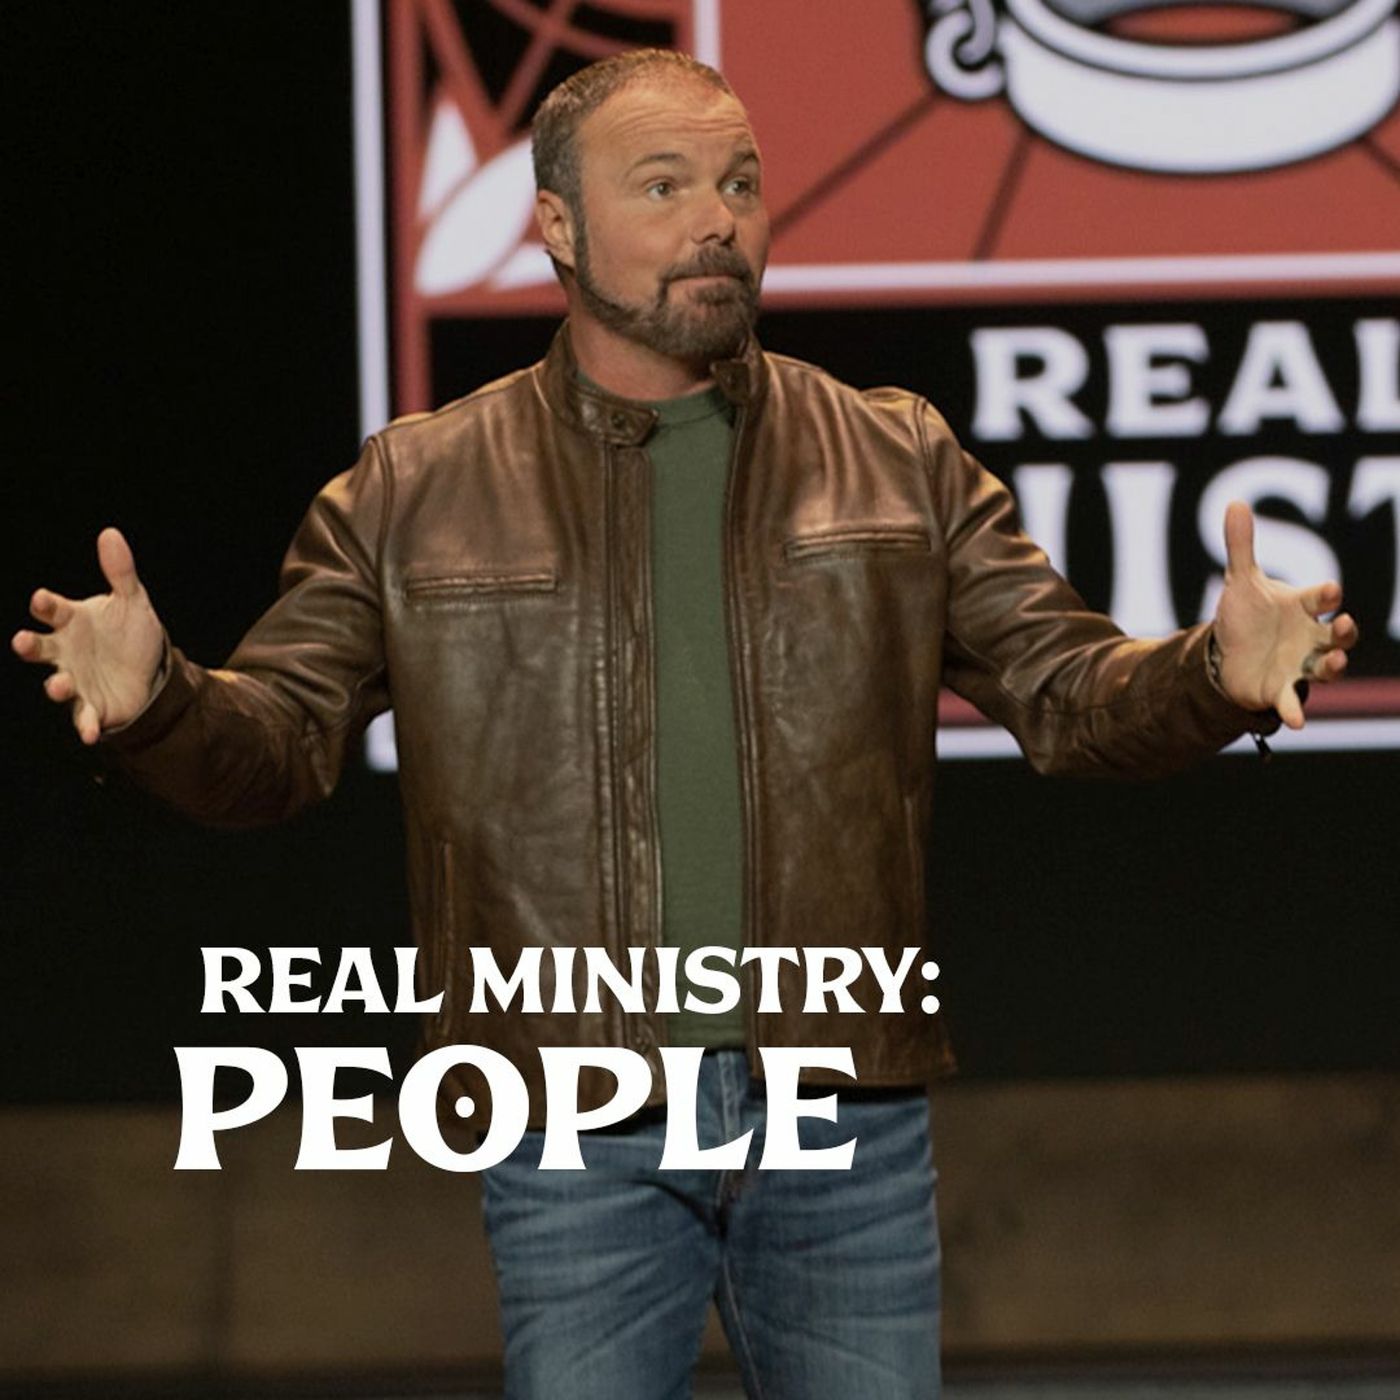 Romans #35 - Real Ministry: People